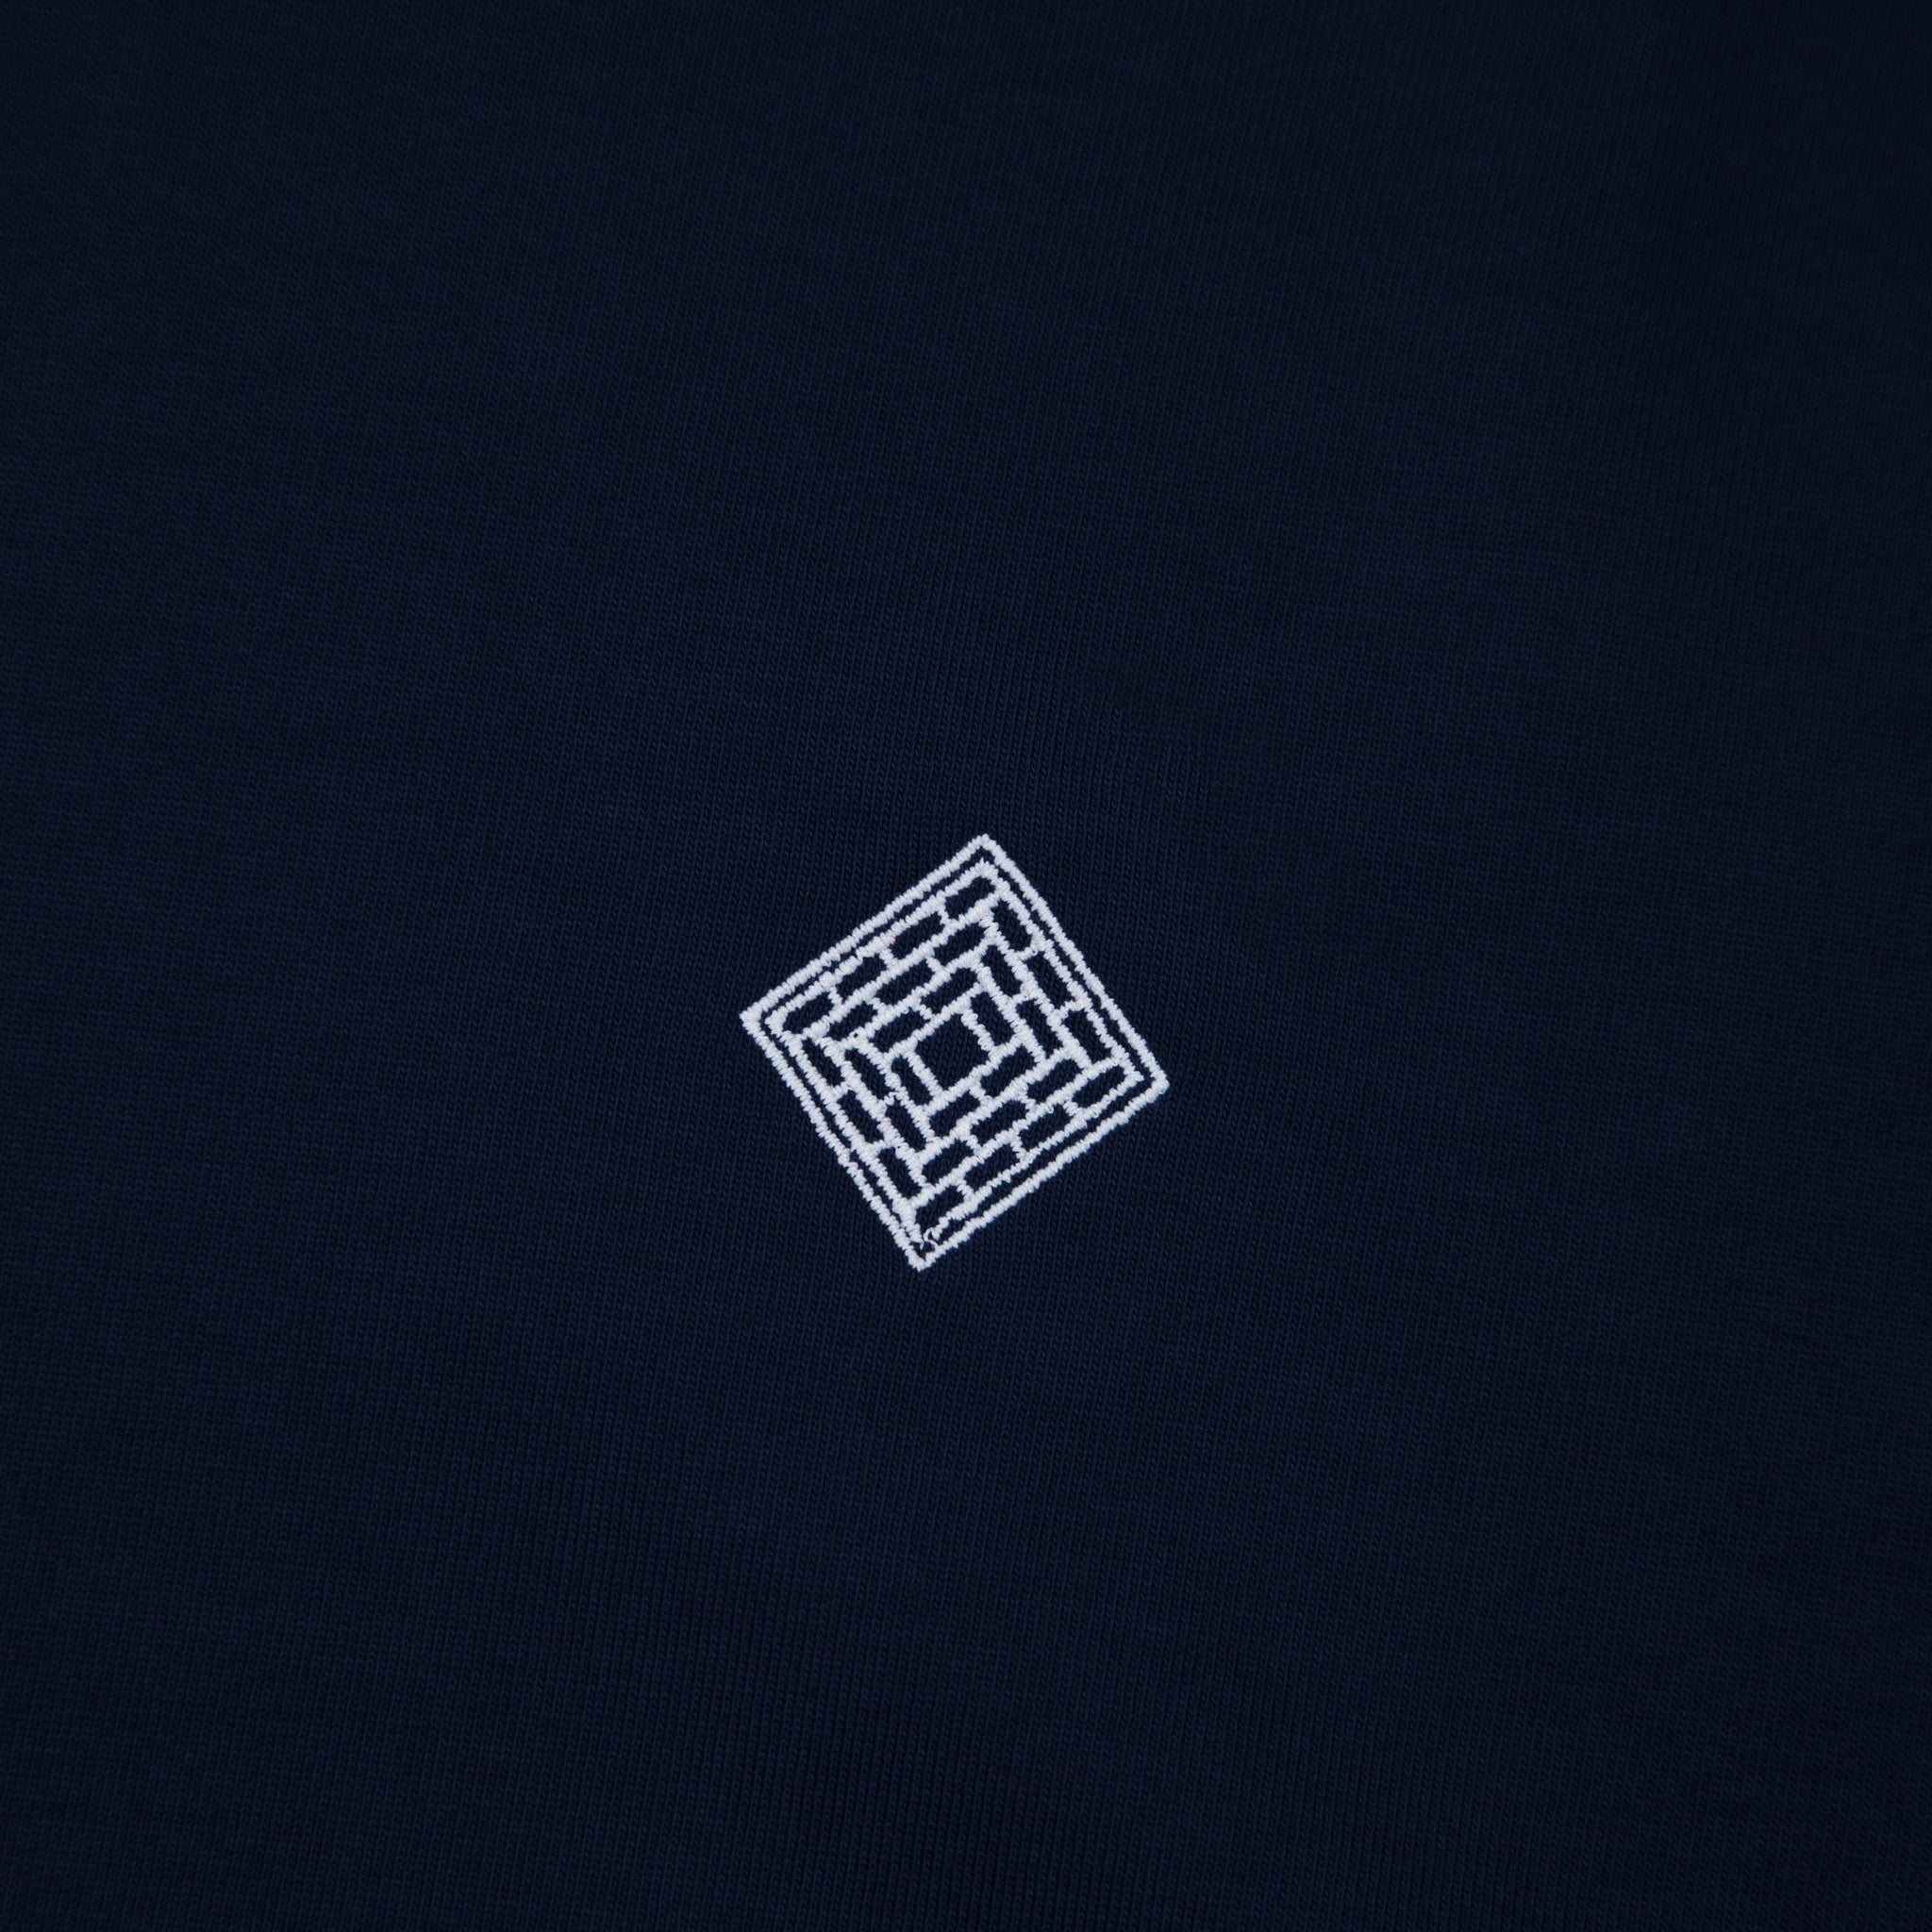 EMBROIDERED LOGO TEE - NAVY BLUE